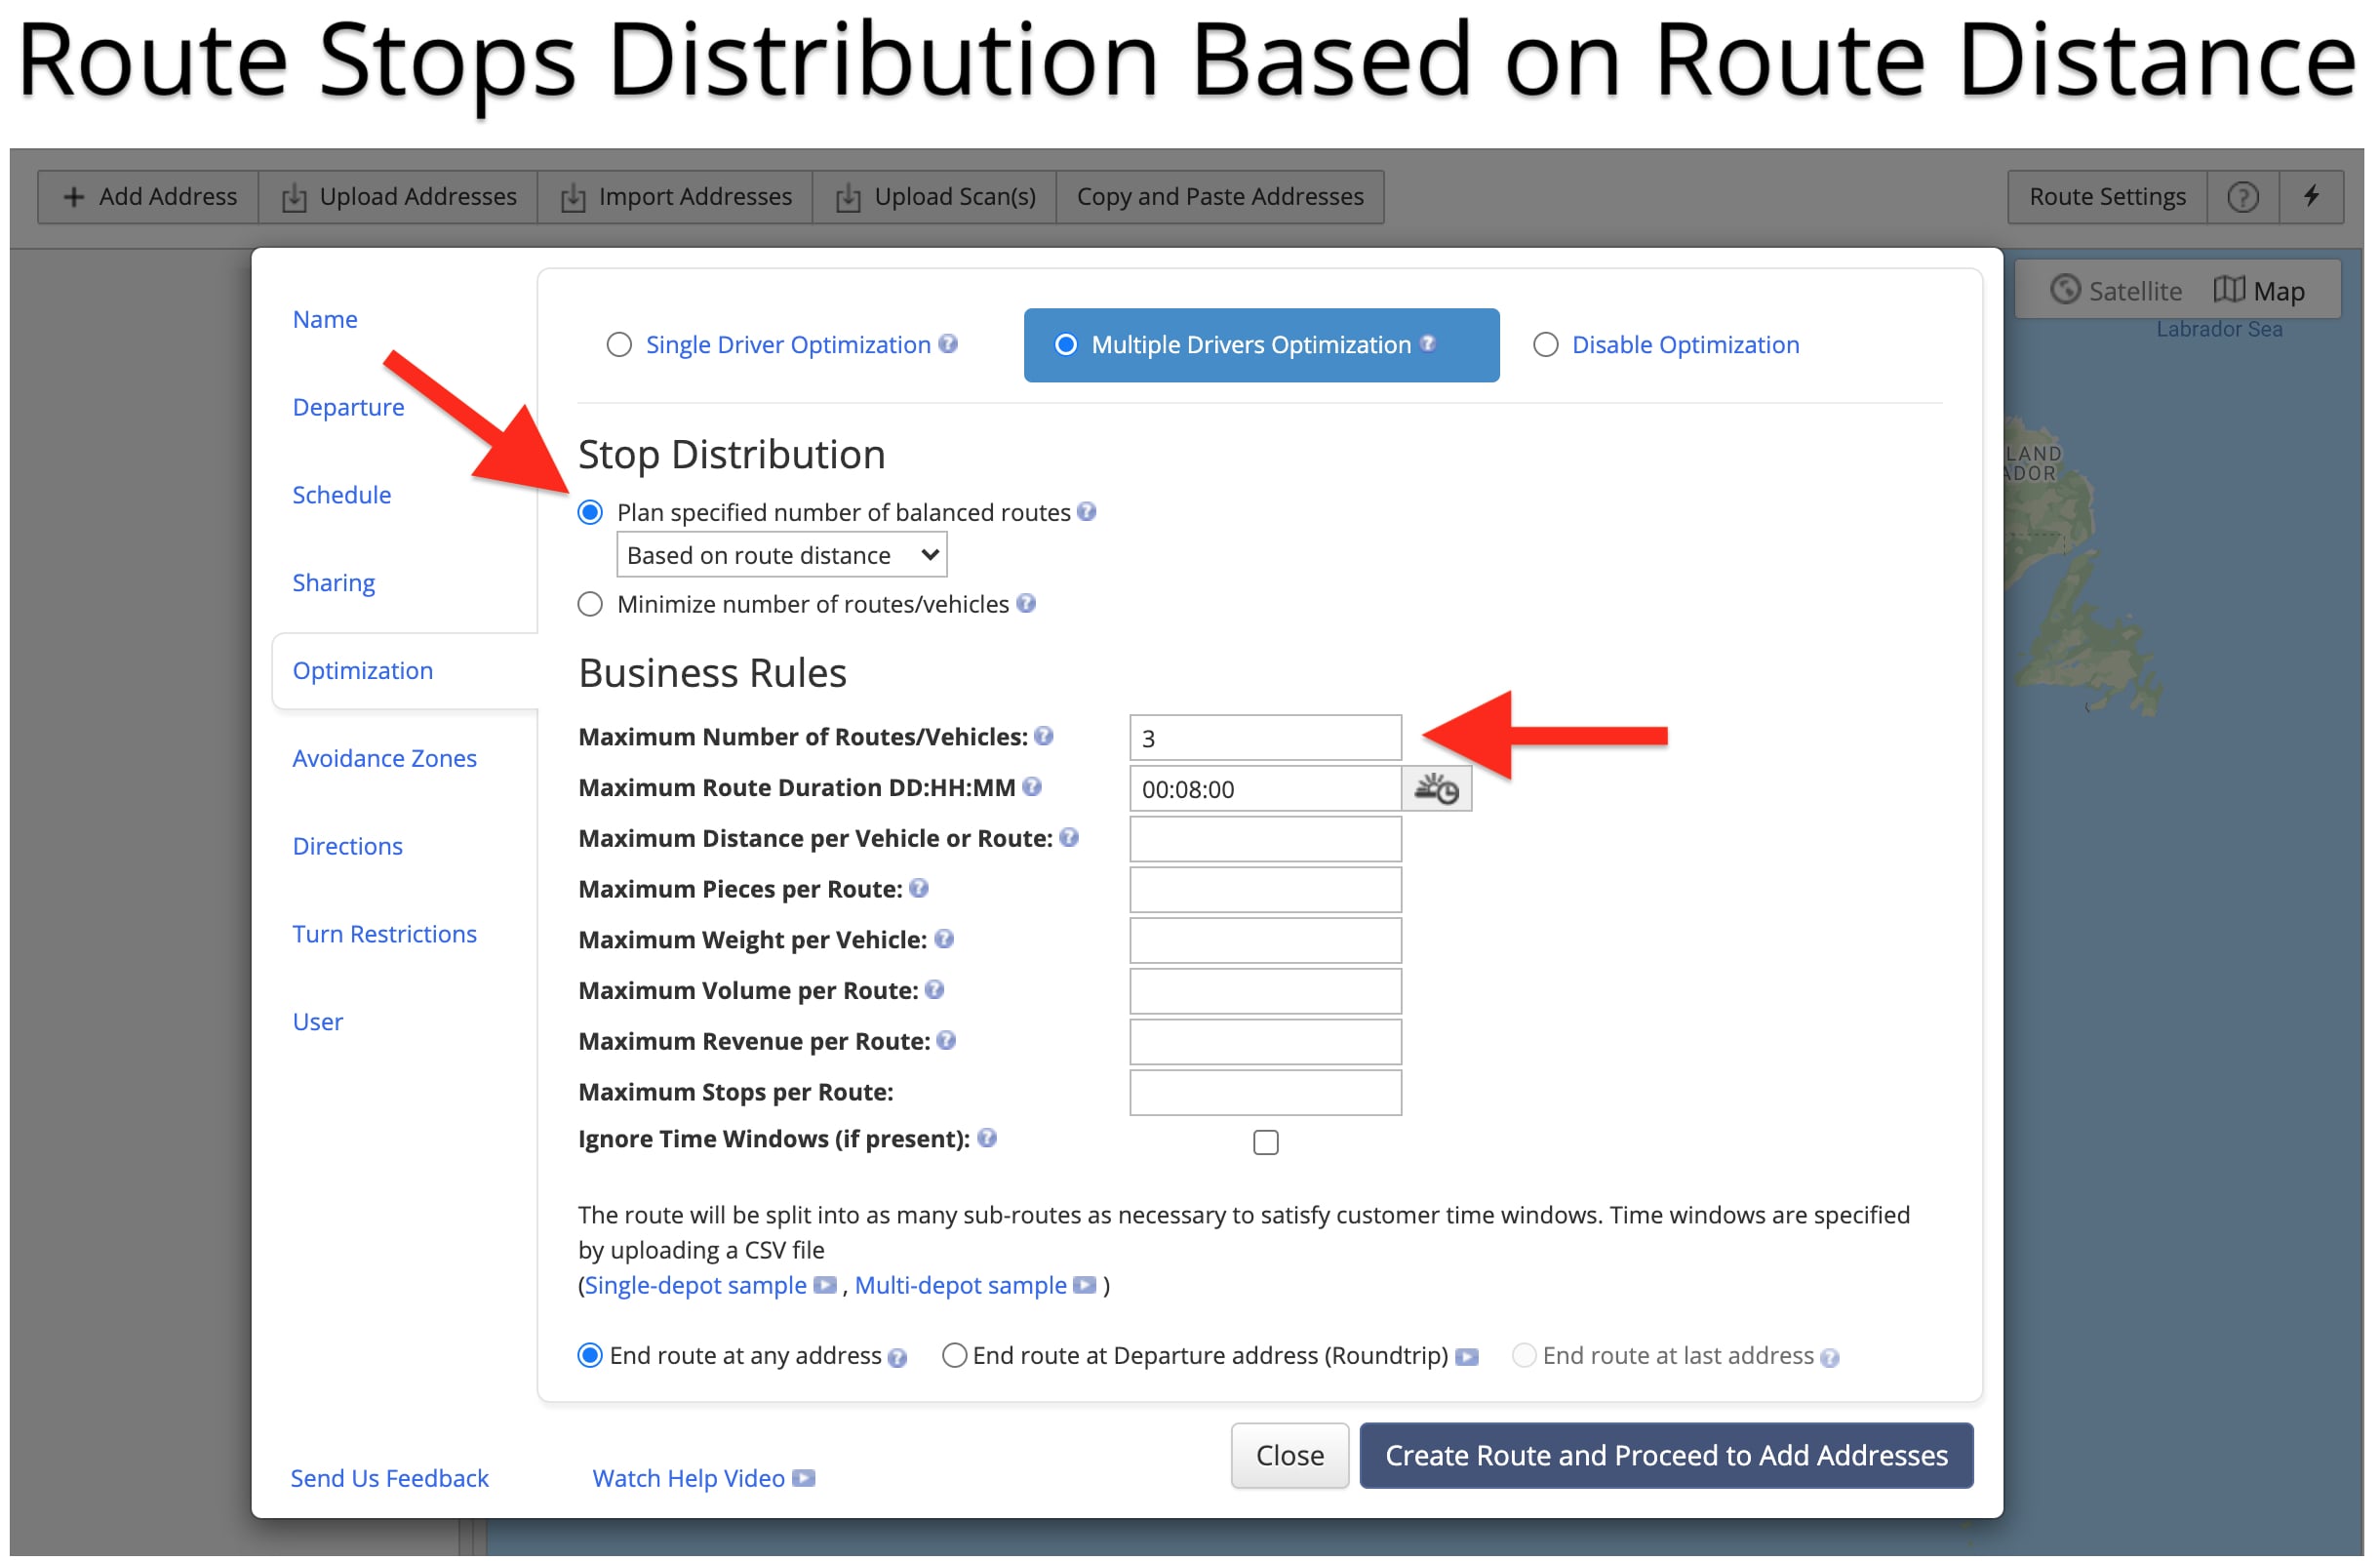 Route stops distribution based on route distance for planning routes with almost equal distances.